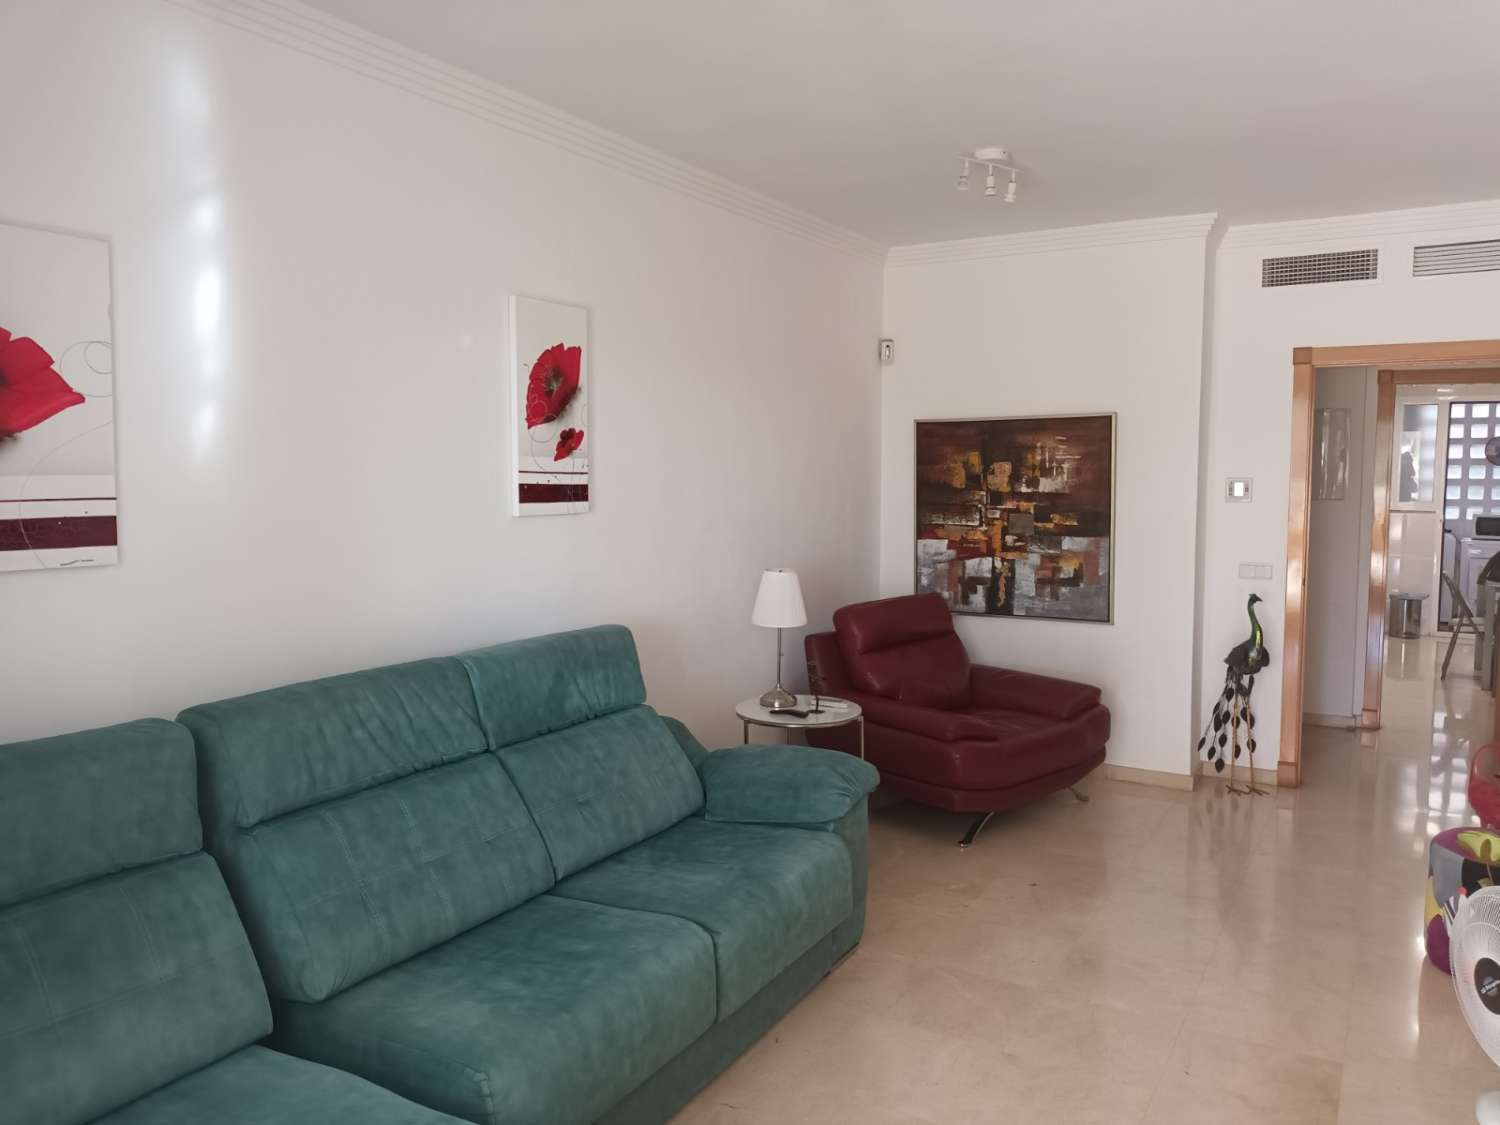 FANTASTIC THREE BEDROOM APARTMENT IN FRONT OF THE GOLF COURSE